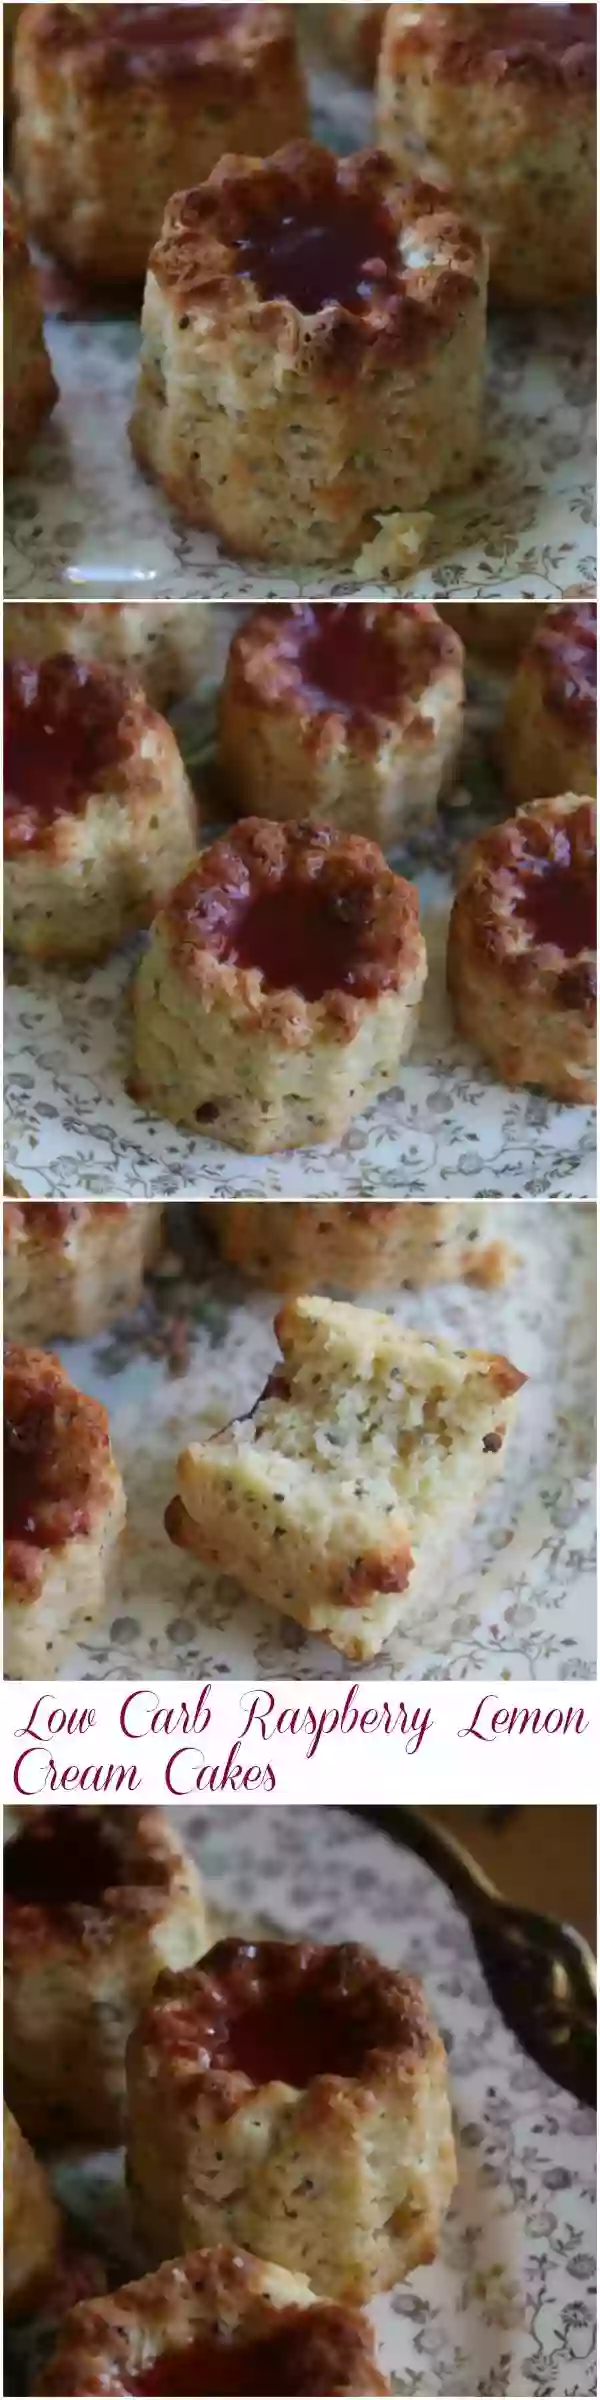 Low carb and gluten free, these raspberry lemon cream cakes are lightly sweet and tender with a sticky raspberry glaze. Lowcarb-ology.com